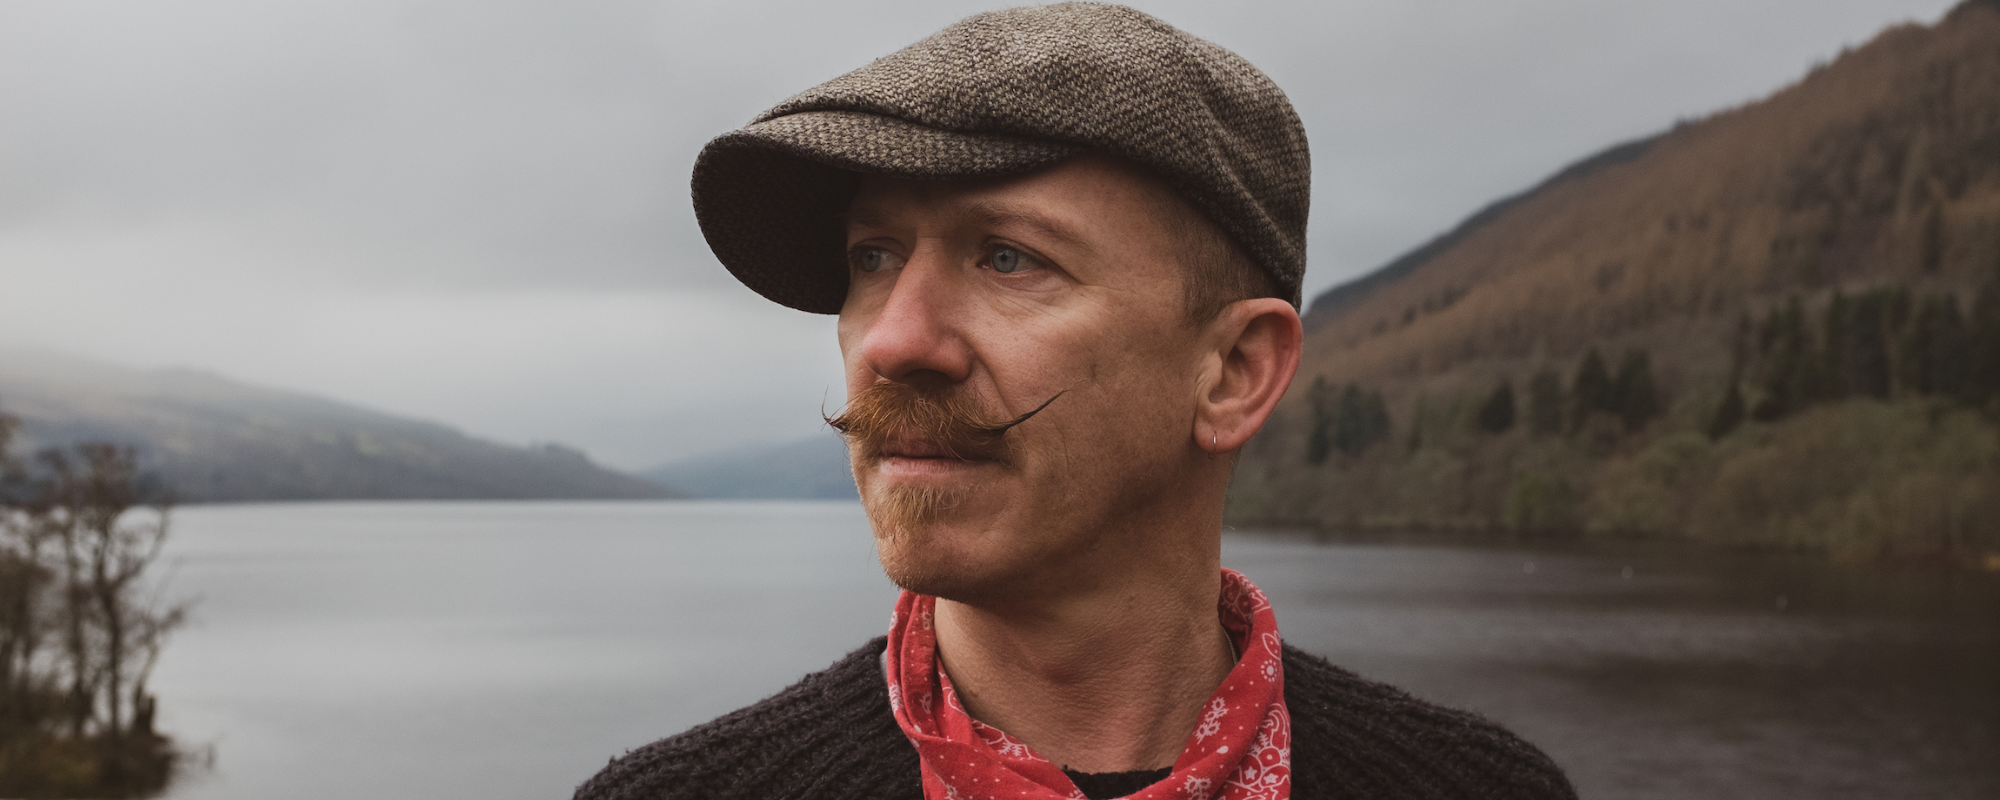 Foy Vance Inventories the ‘Signs of Life’ That Reawakened His Artistic Spirit